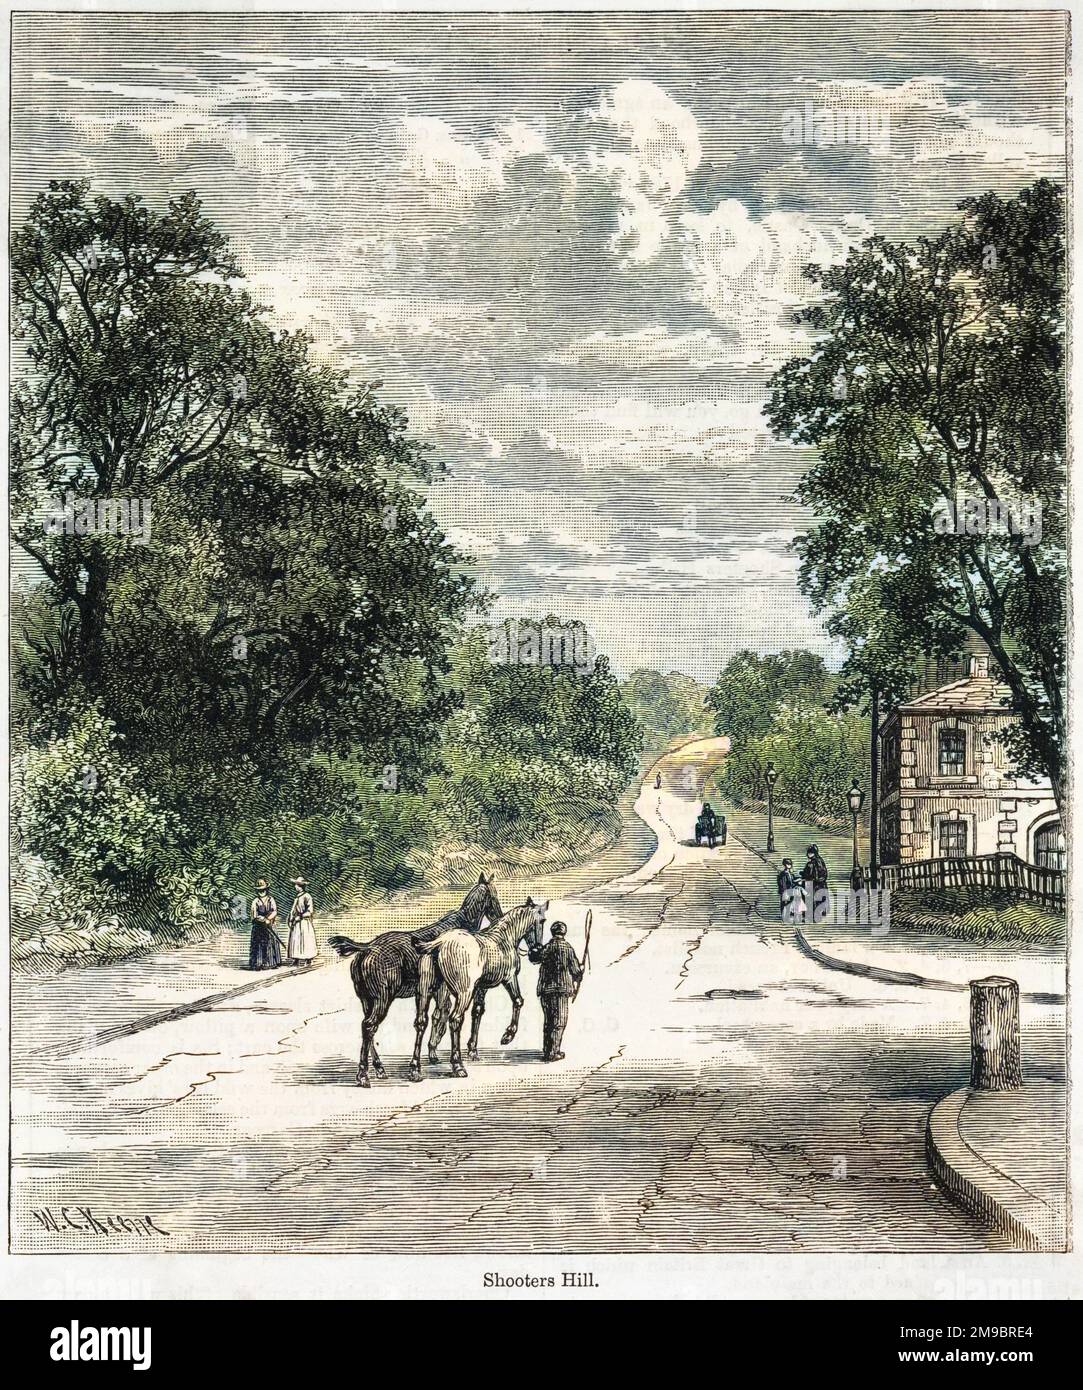 Shooters Hill is named after the archery butts located here in the 16th century : later it was a favourite haunt of highwayman, attacking travelers bound for France. Stock Photo